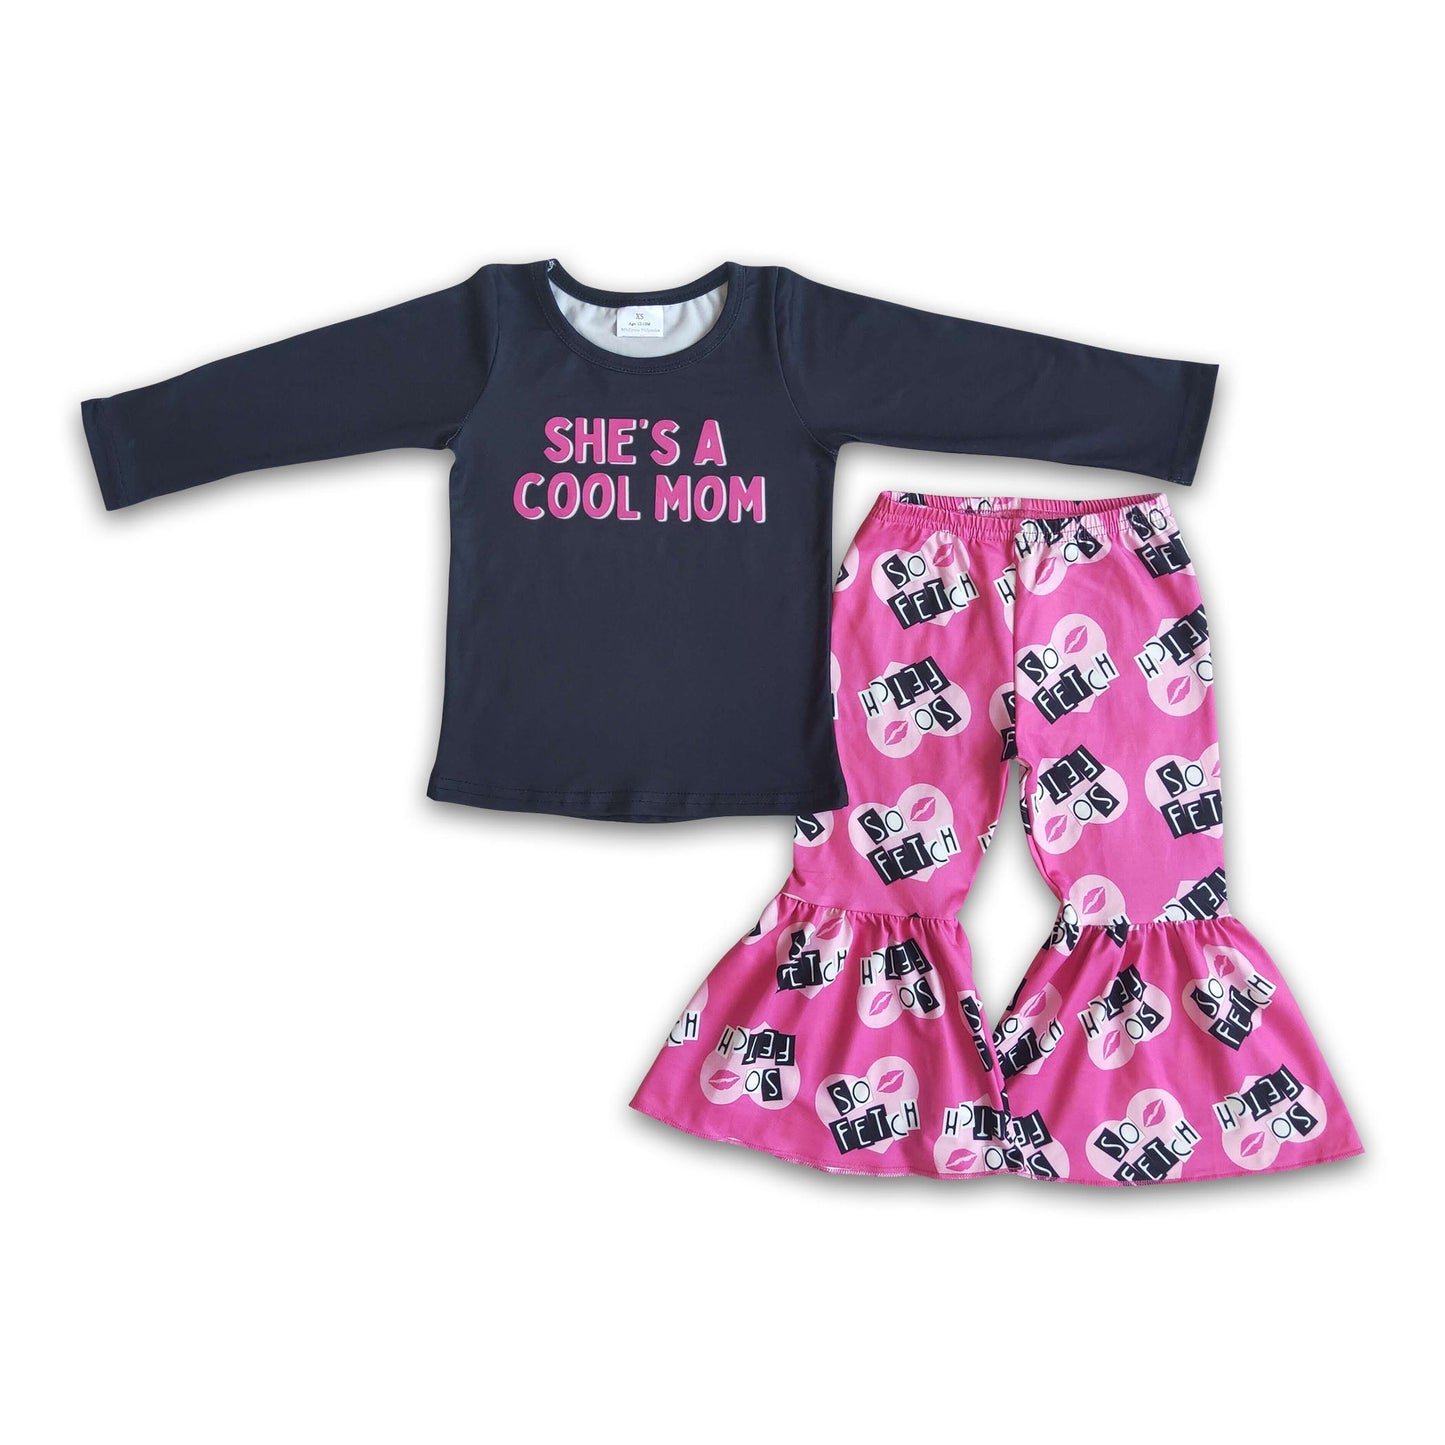 She is a cool mom shirt bell bottom pants set kids clothes girls